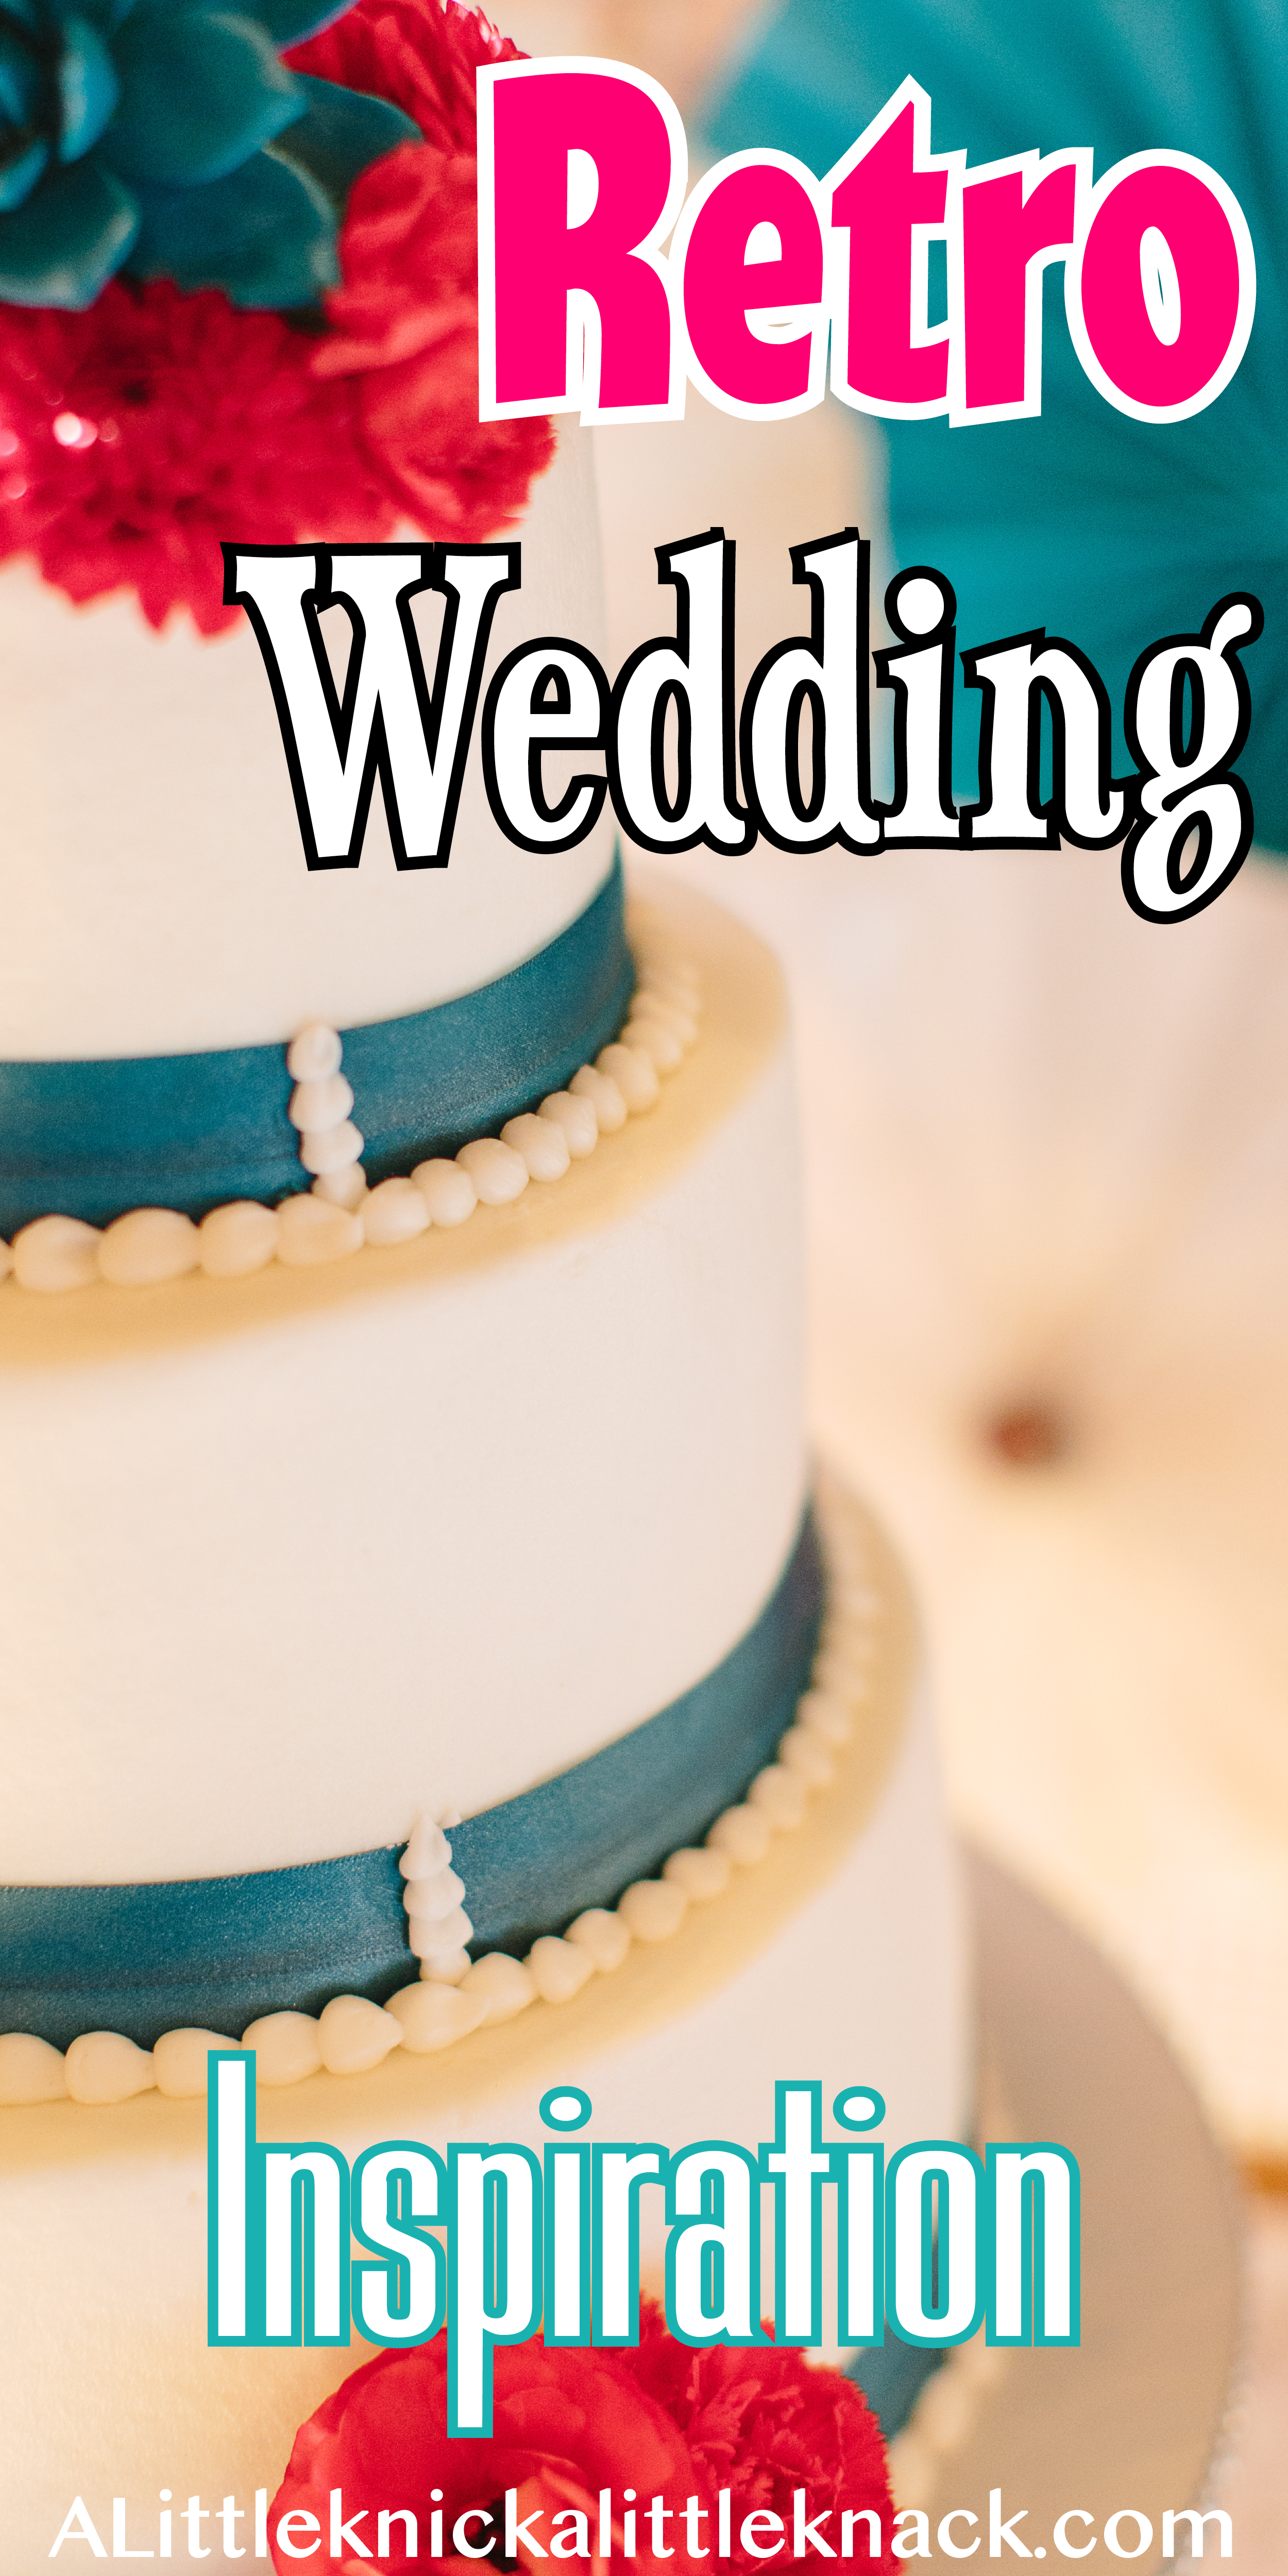 A wedding cake with teal ribbon and red and teal flowers with text overlay